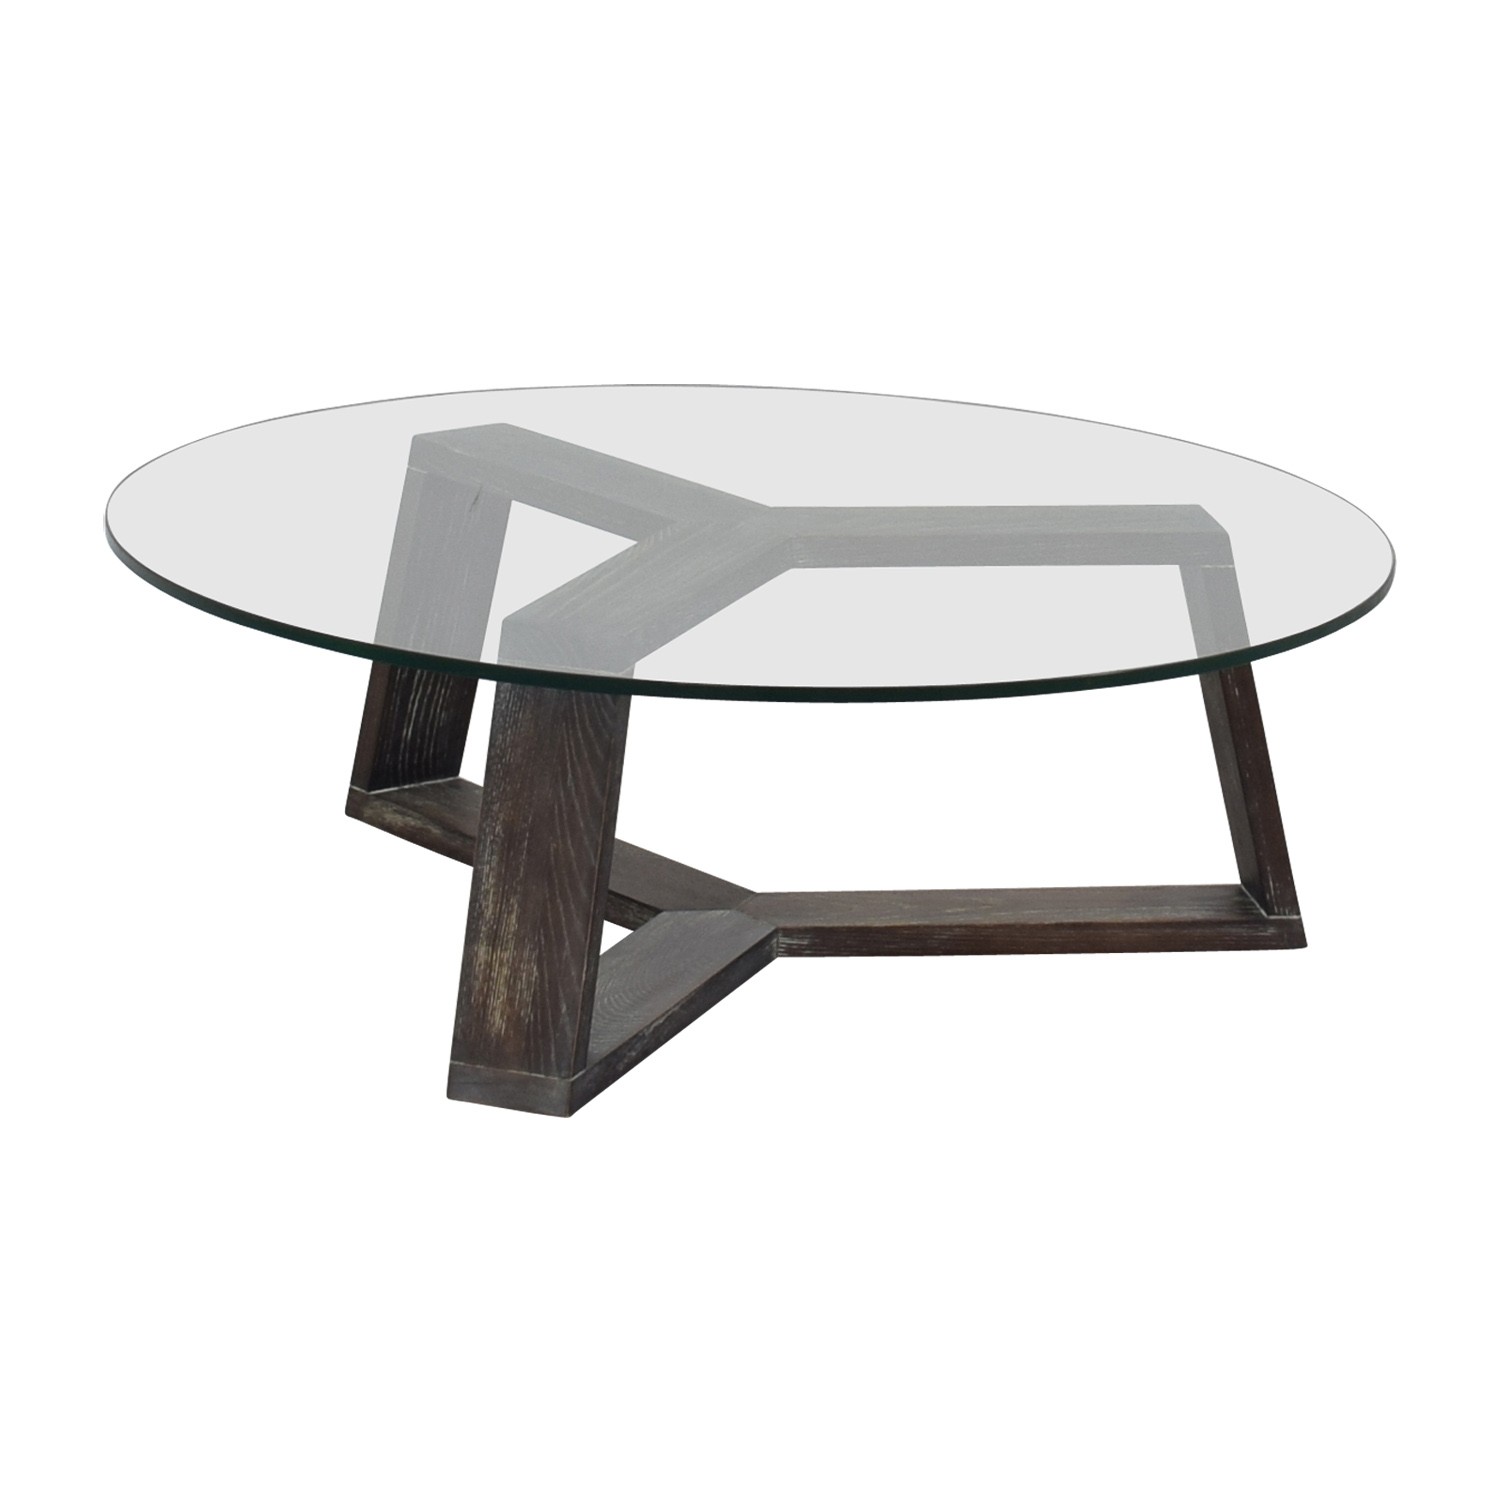 83 off cb2 cb2 round glass and wood coffee table